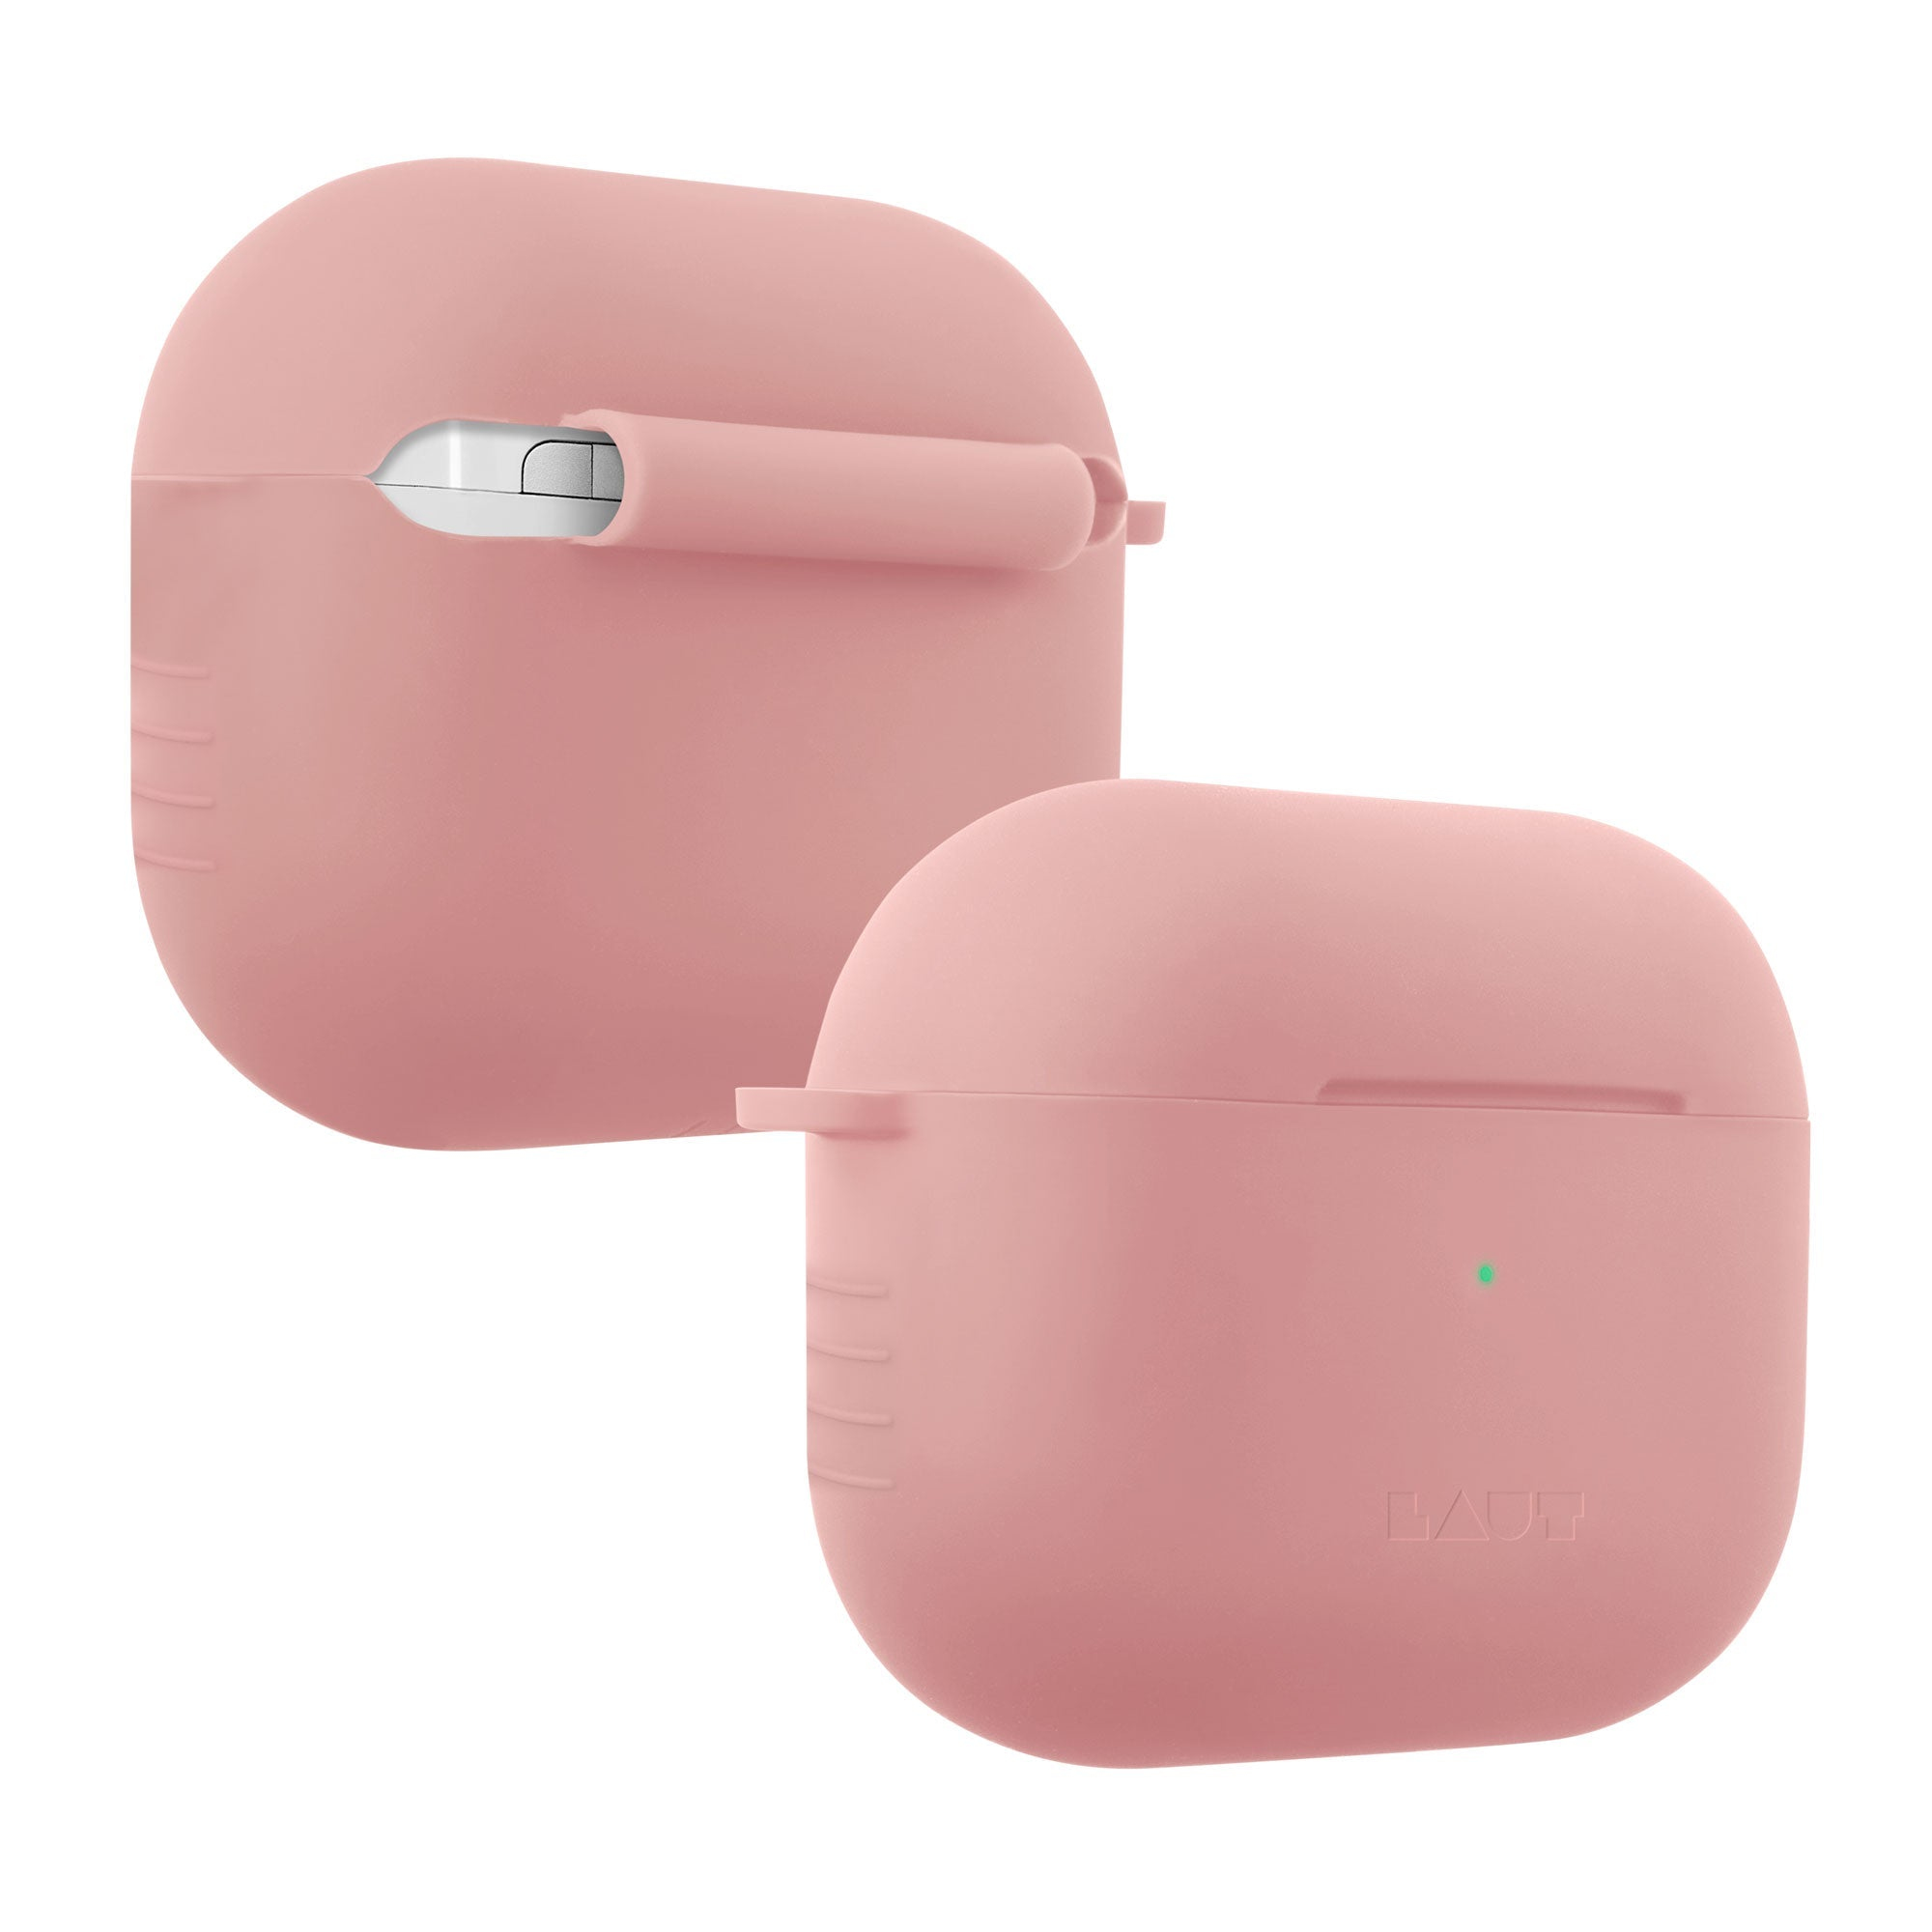 Laut International POD Blush Pink L_AP4_POD_DP Protective silicon case for AirPods 3rd Gen.